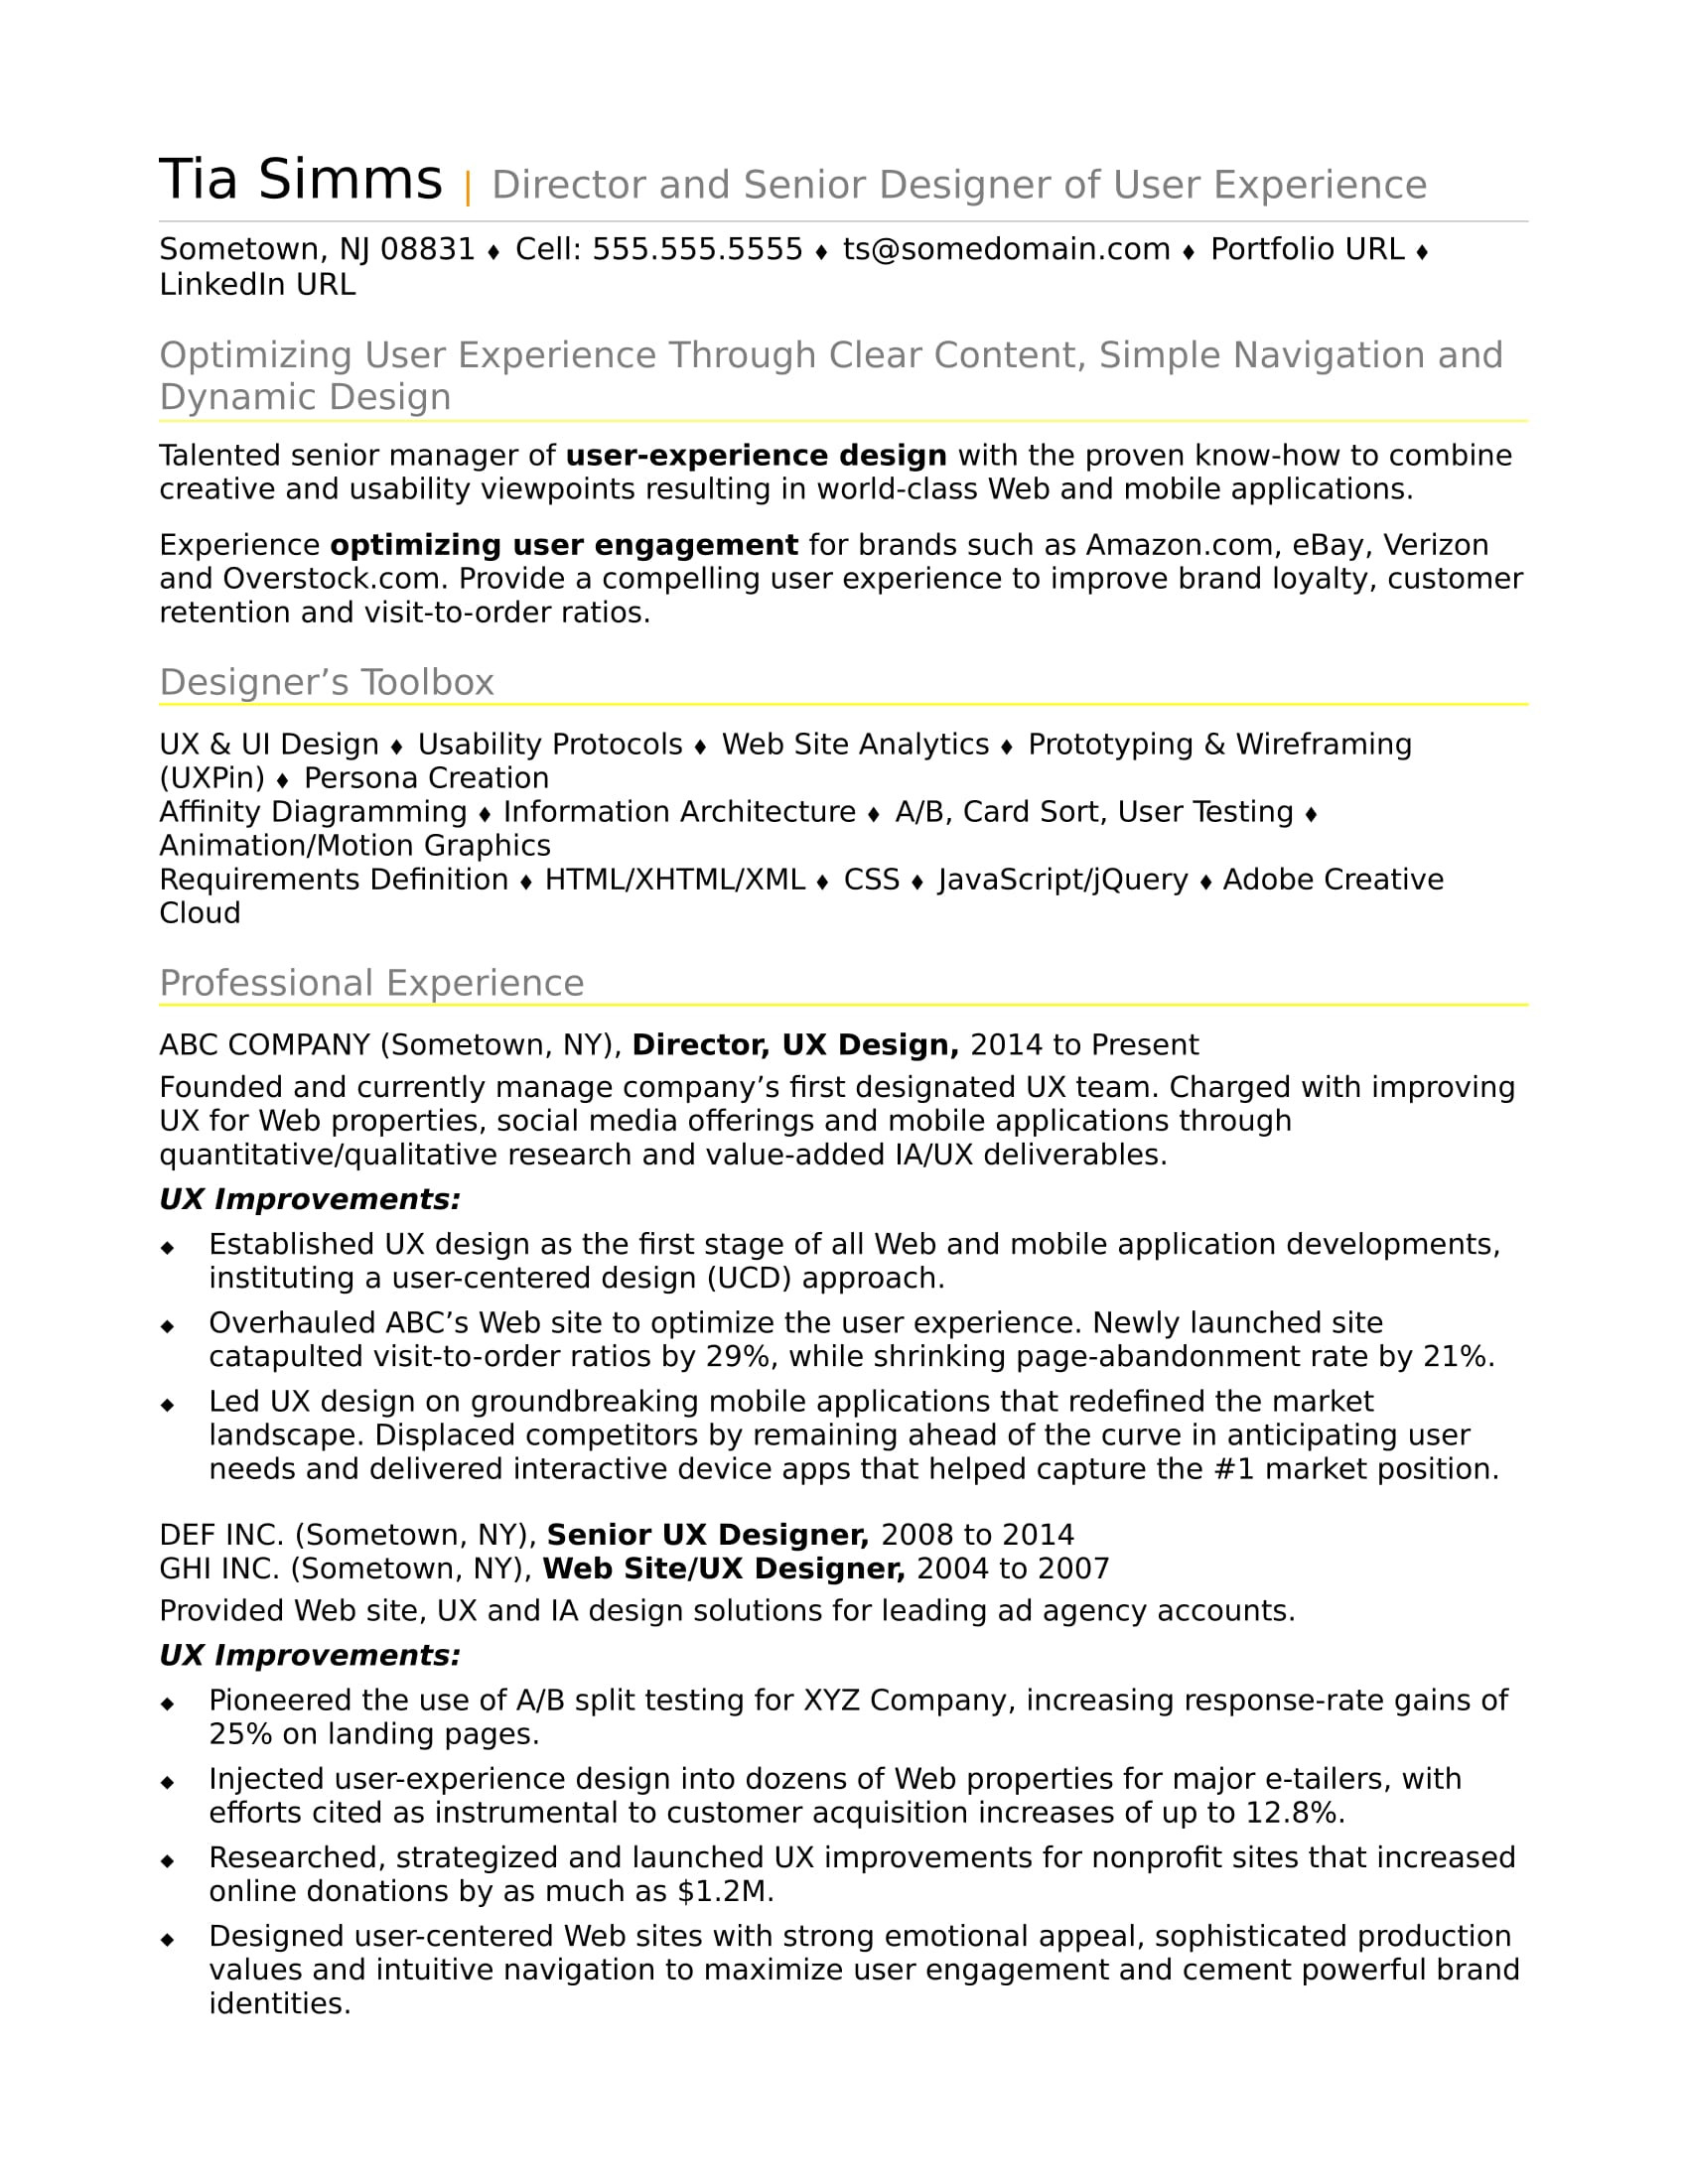 Sample Of Resume for Experienced Person Sample Resume for An Experienced Ux Designer Monster.com